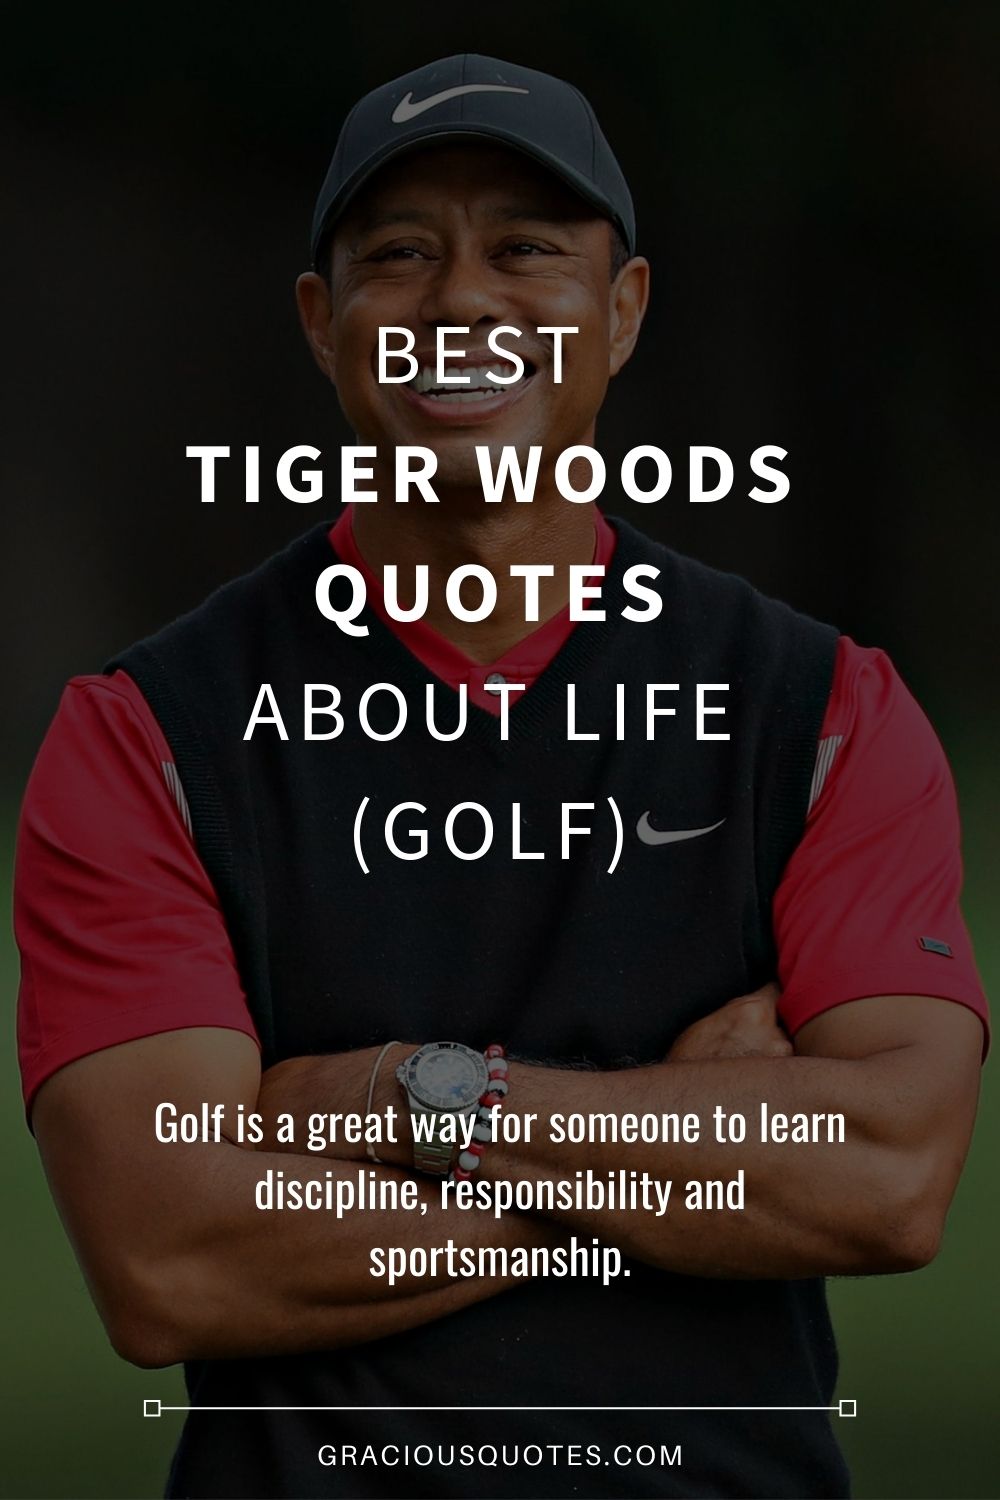 Best Tiger Woods Quotes About Life (GOLF) - Gracious Quotes